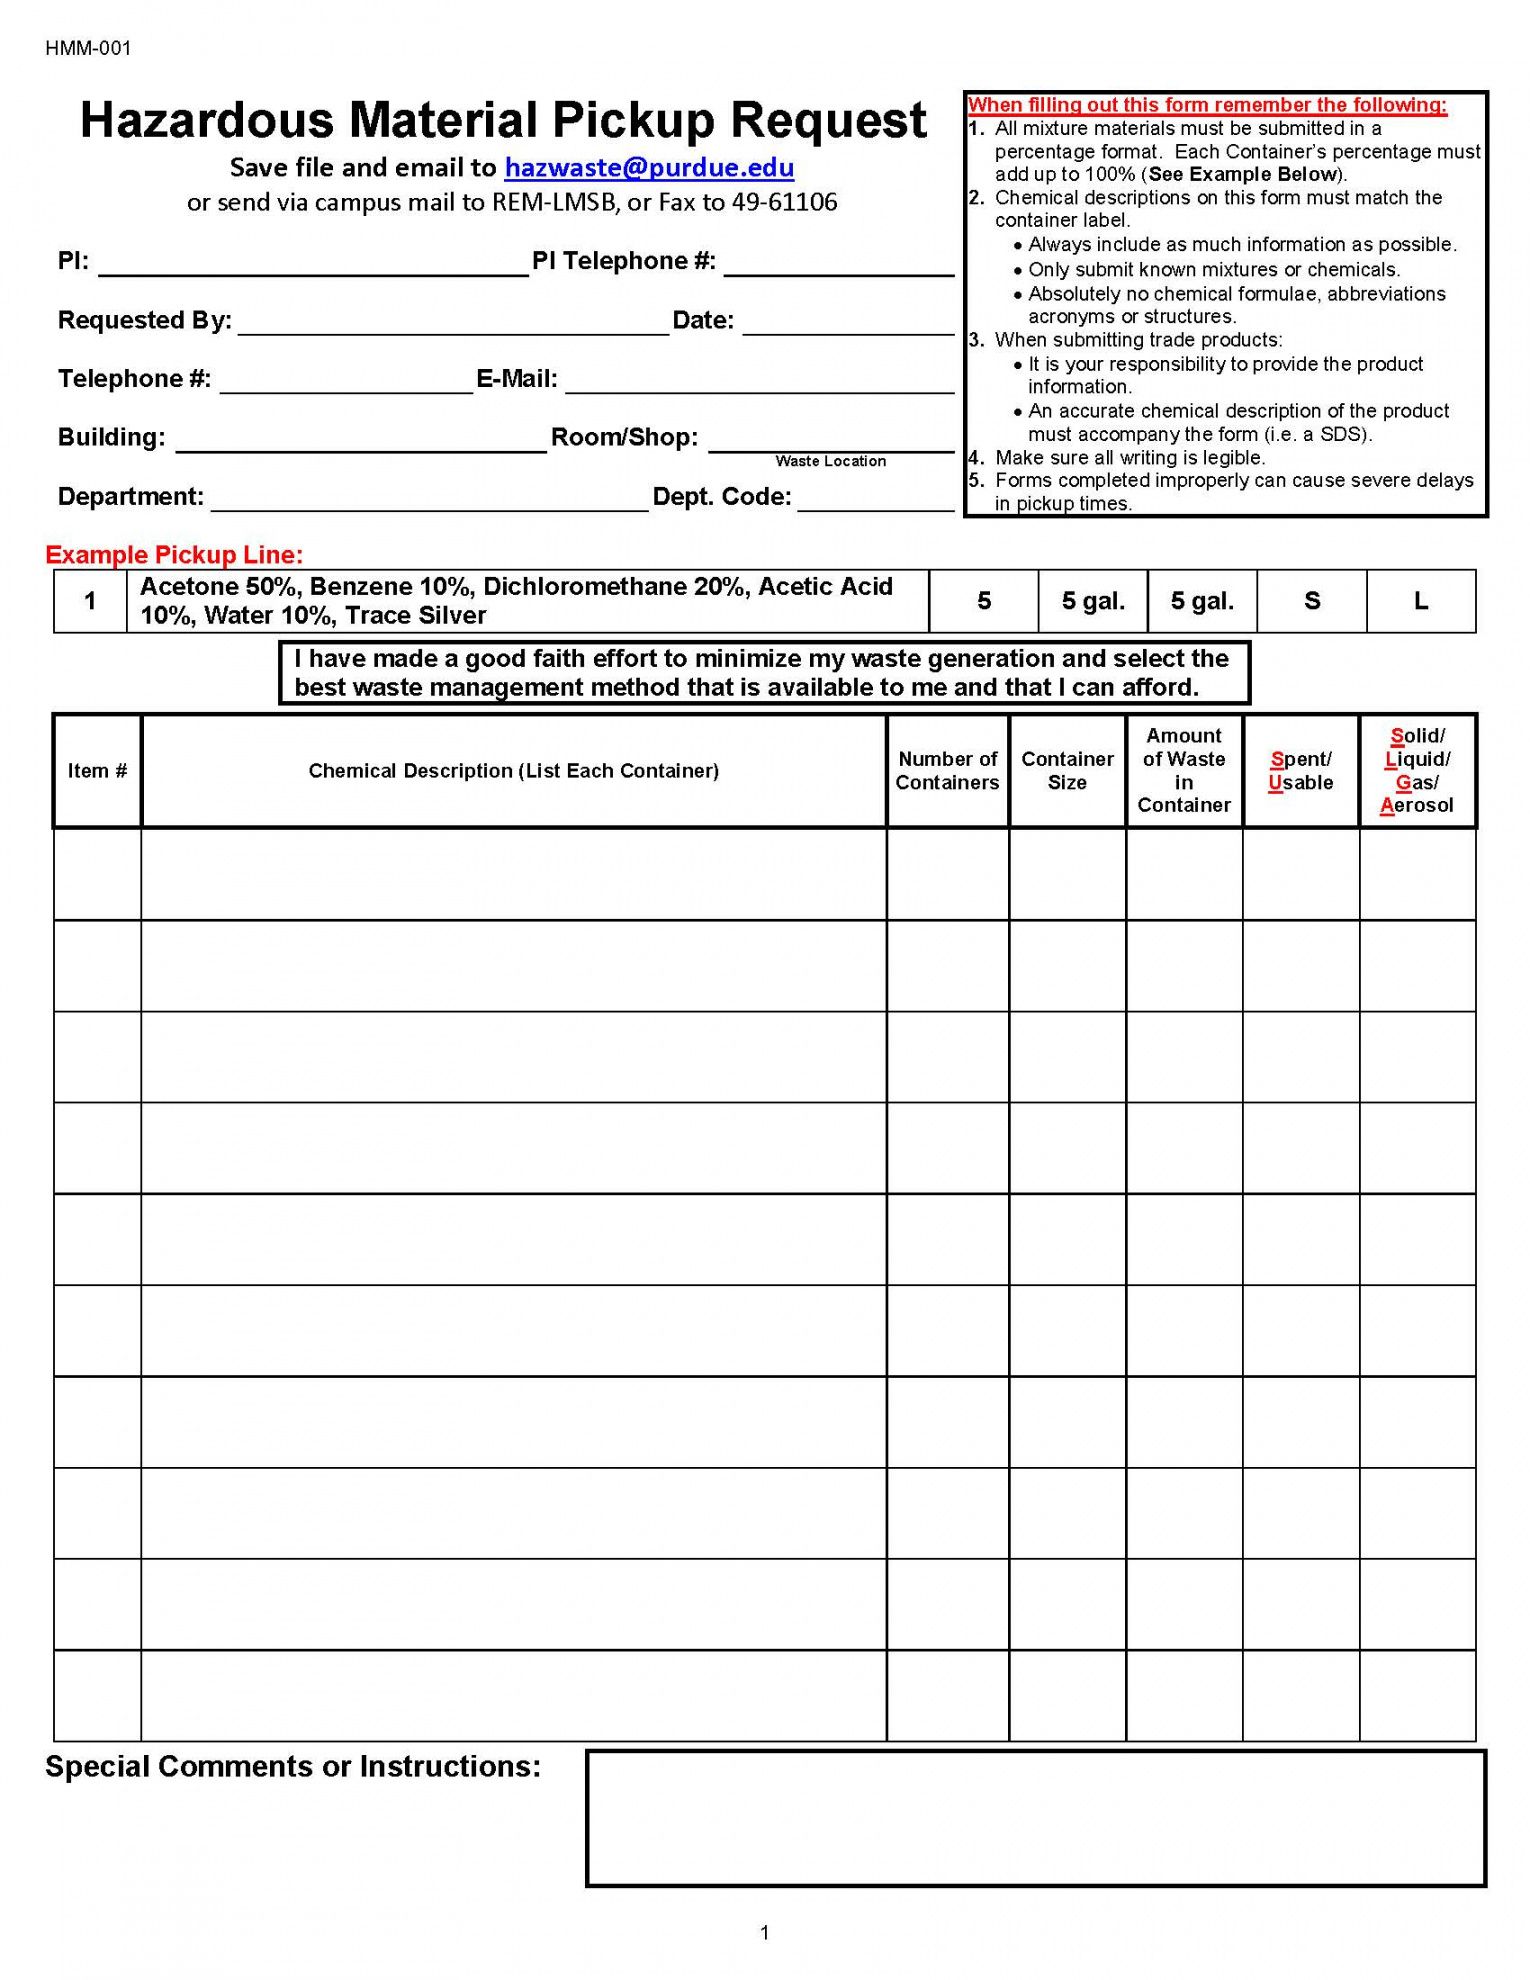 printable all forms  radiological and environmental management  purdue university hazardous substances inventory template doc